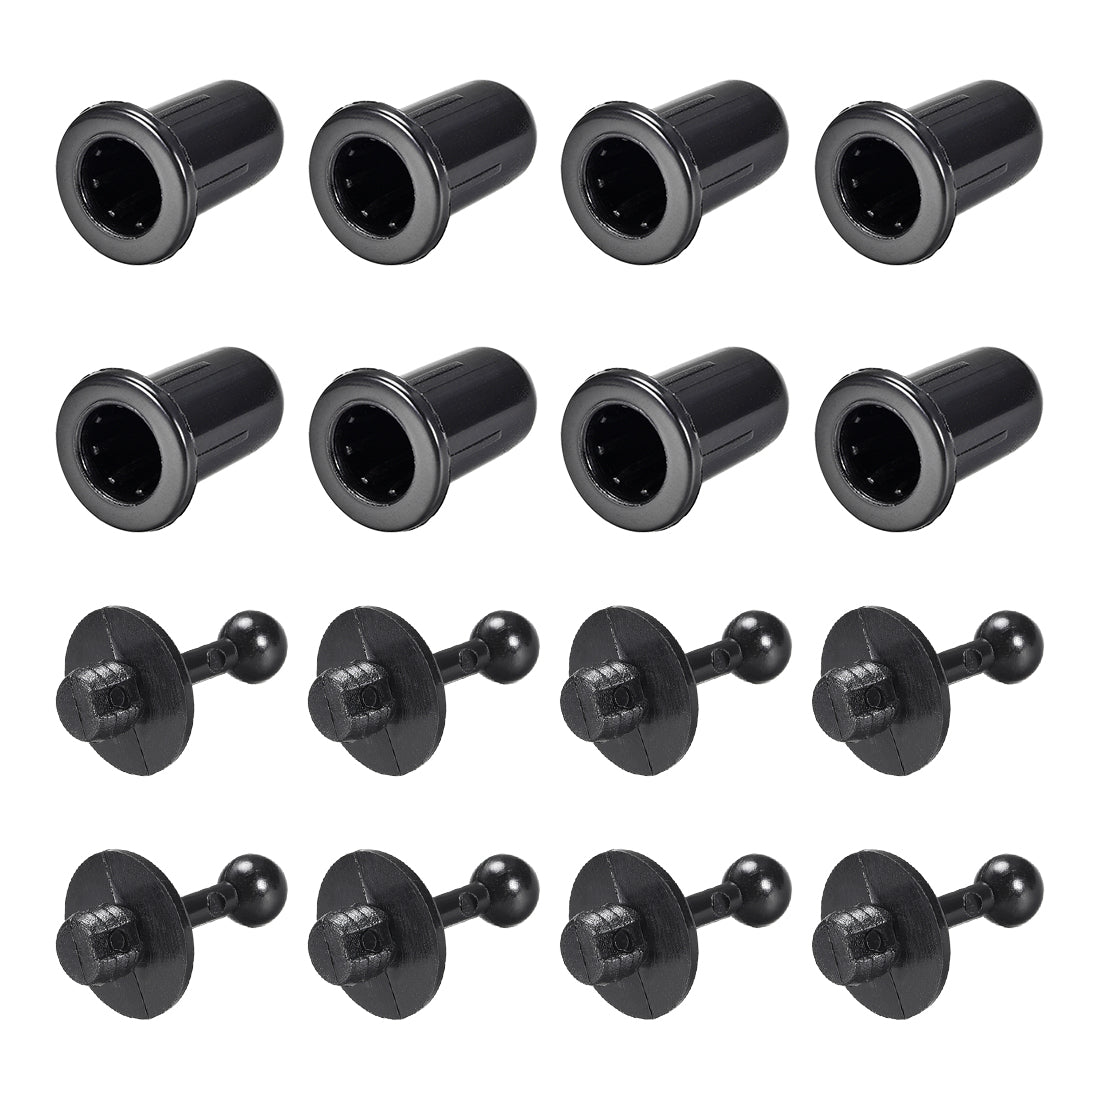 uxcell Uxcell Speaker Small Peg Kit Guides 25.5mm Black Dia 6mm 8 Pairs